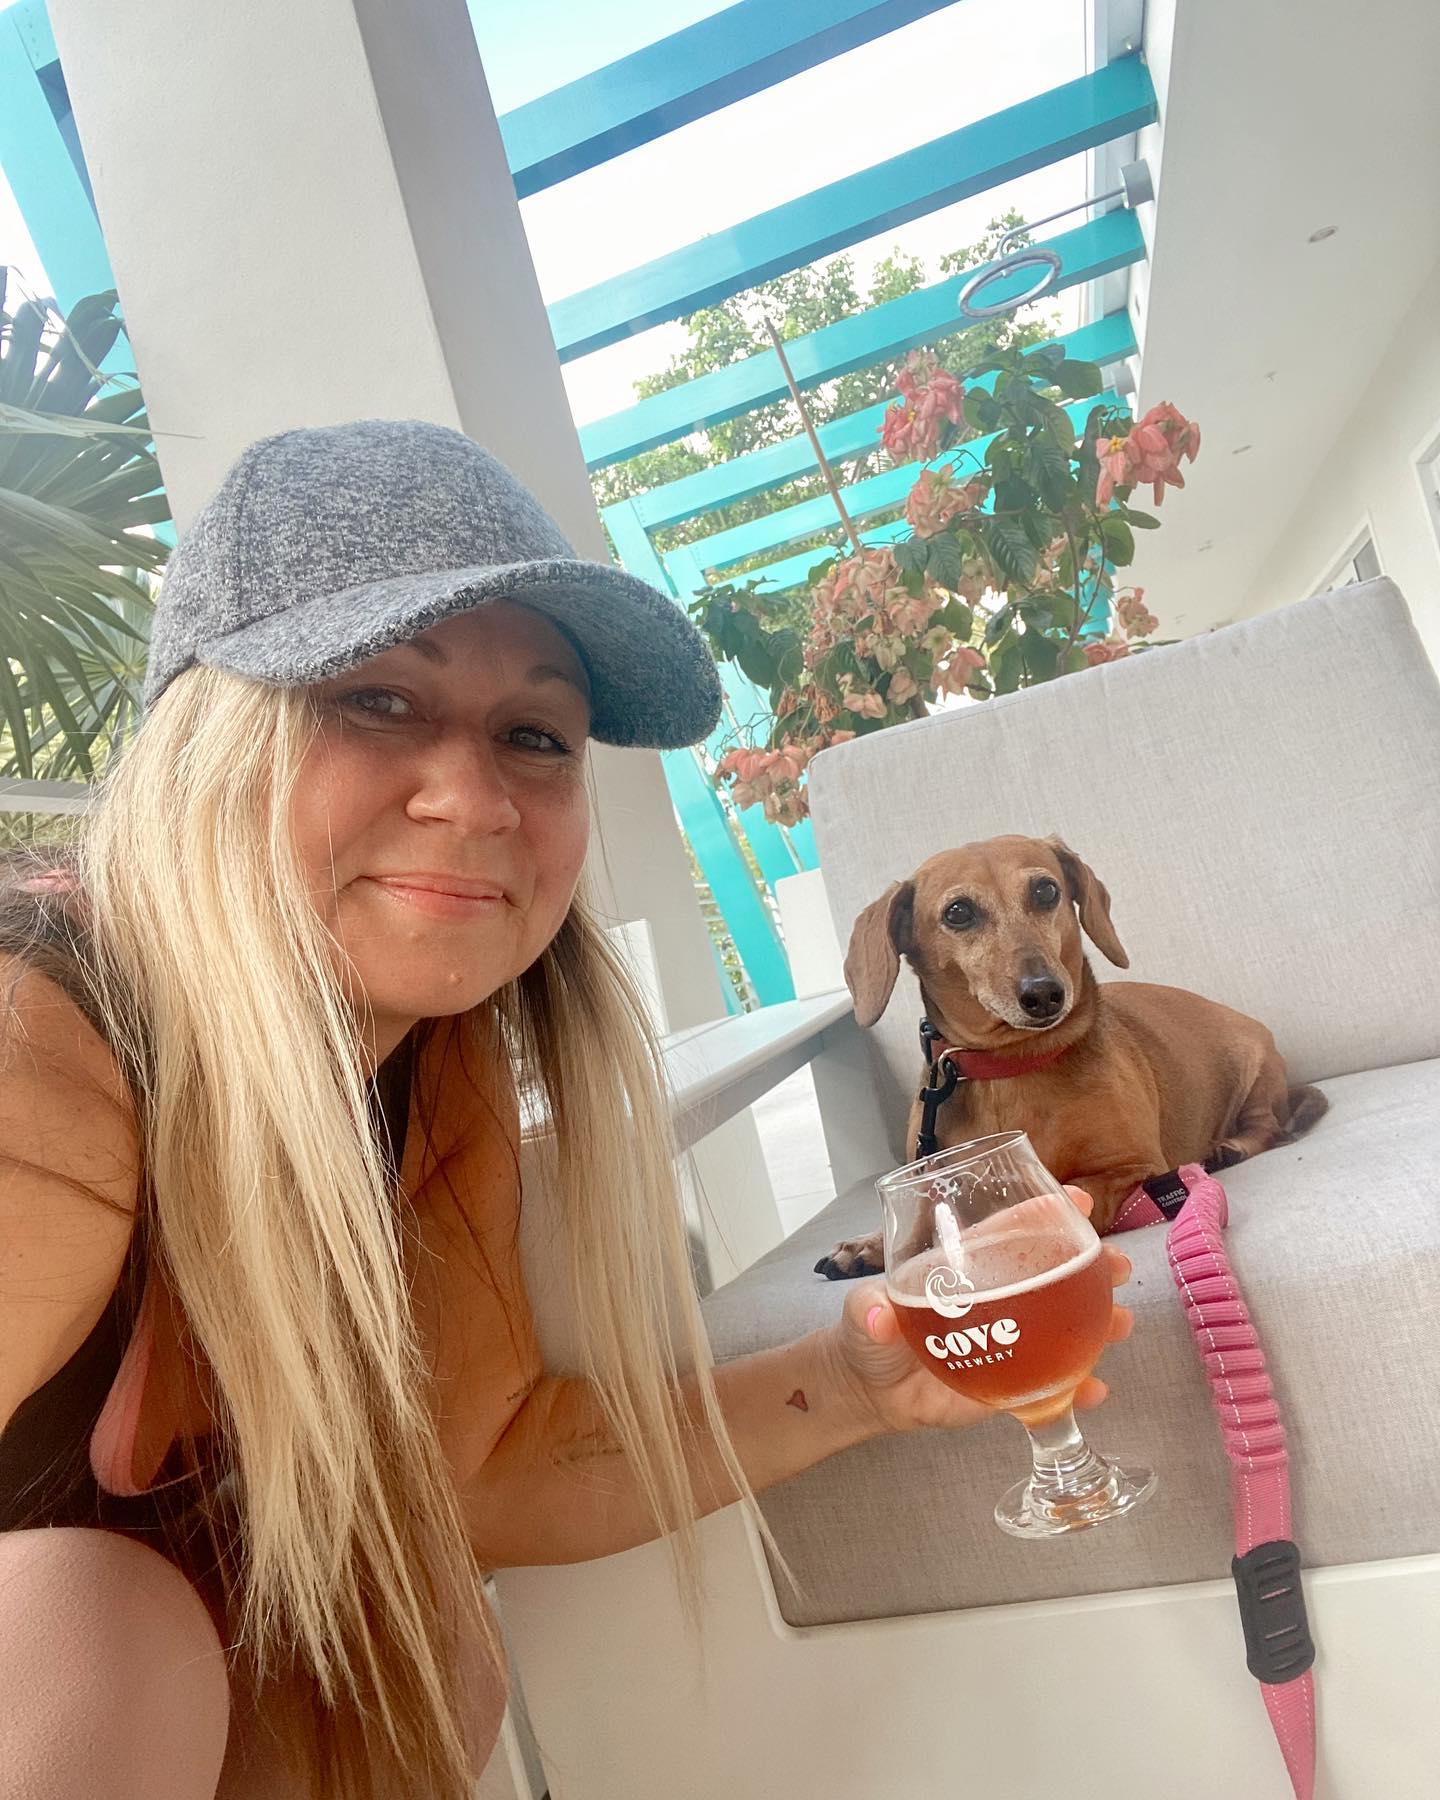 Pet Friendly Cove Brewery